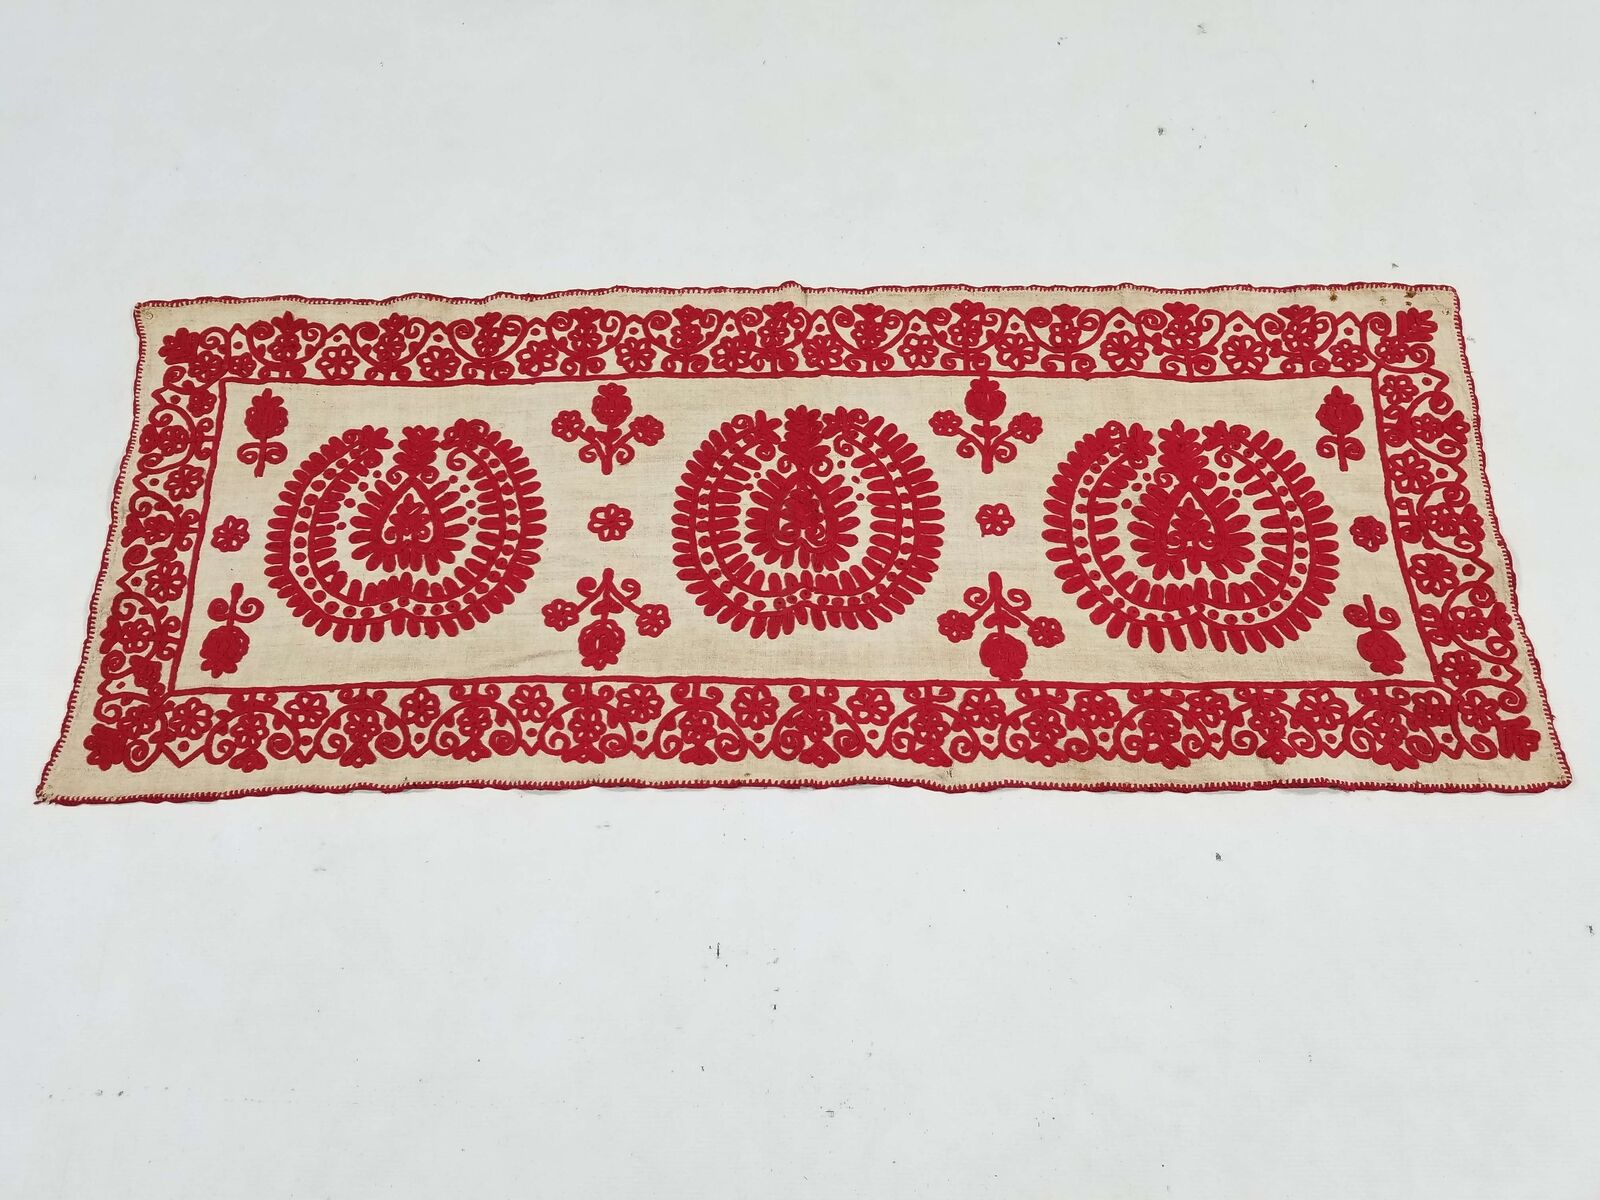 Antique Traditional Hungarian/Transylvanian Embroidered Tablecloth 129x51cm